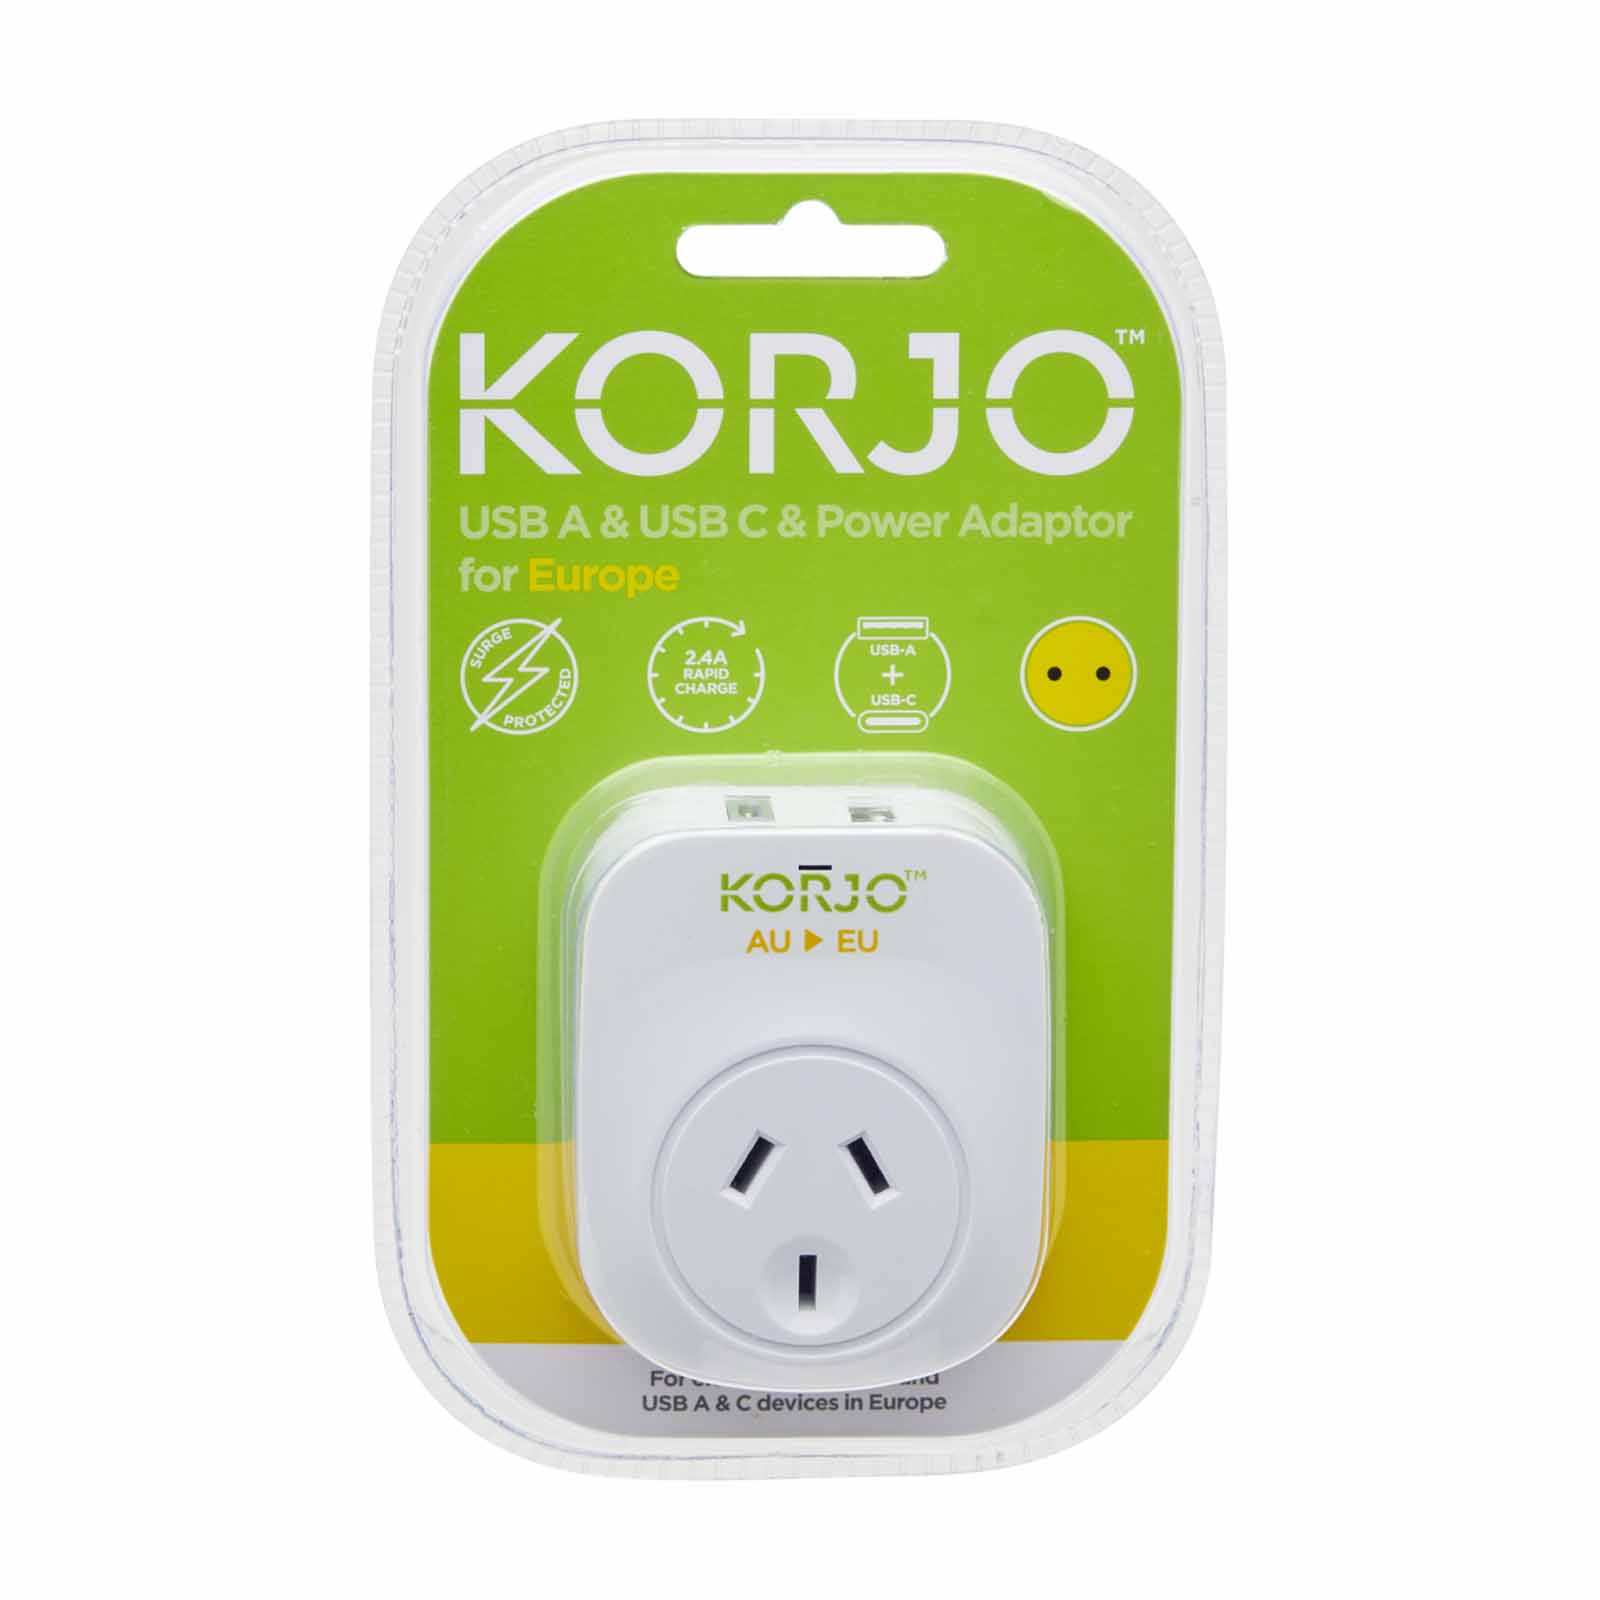 Korjo-Travel-Adaptor-Usb-Port-A-And-C-Australia-To-Europe-Package